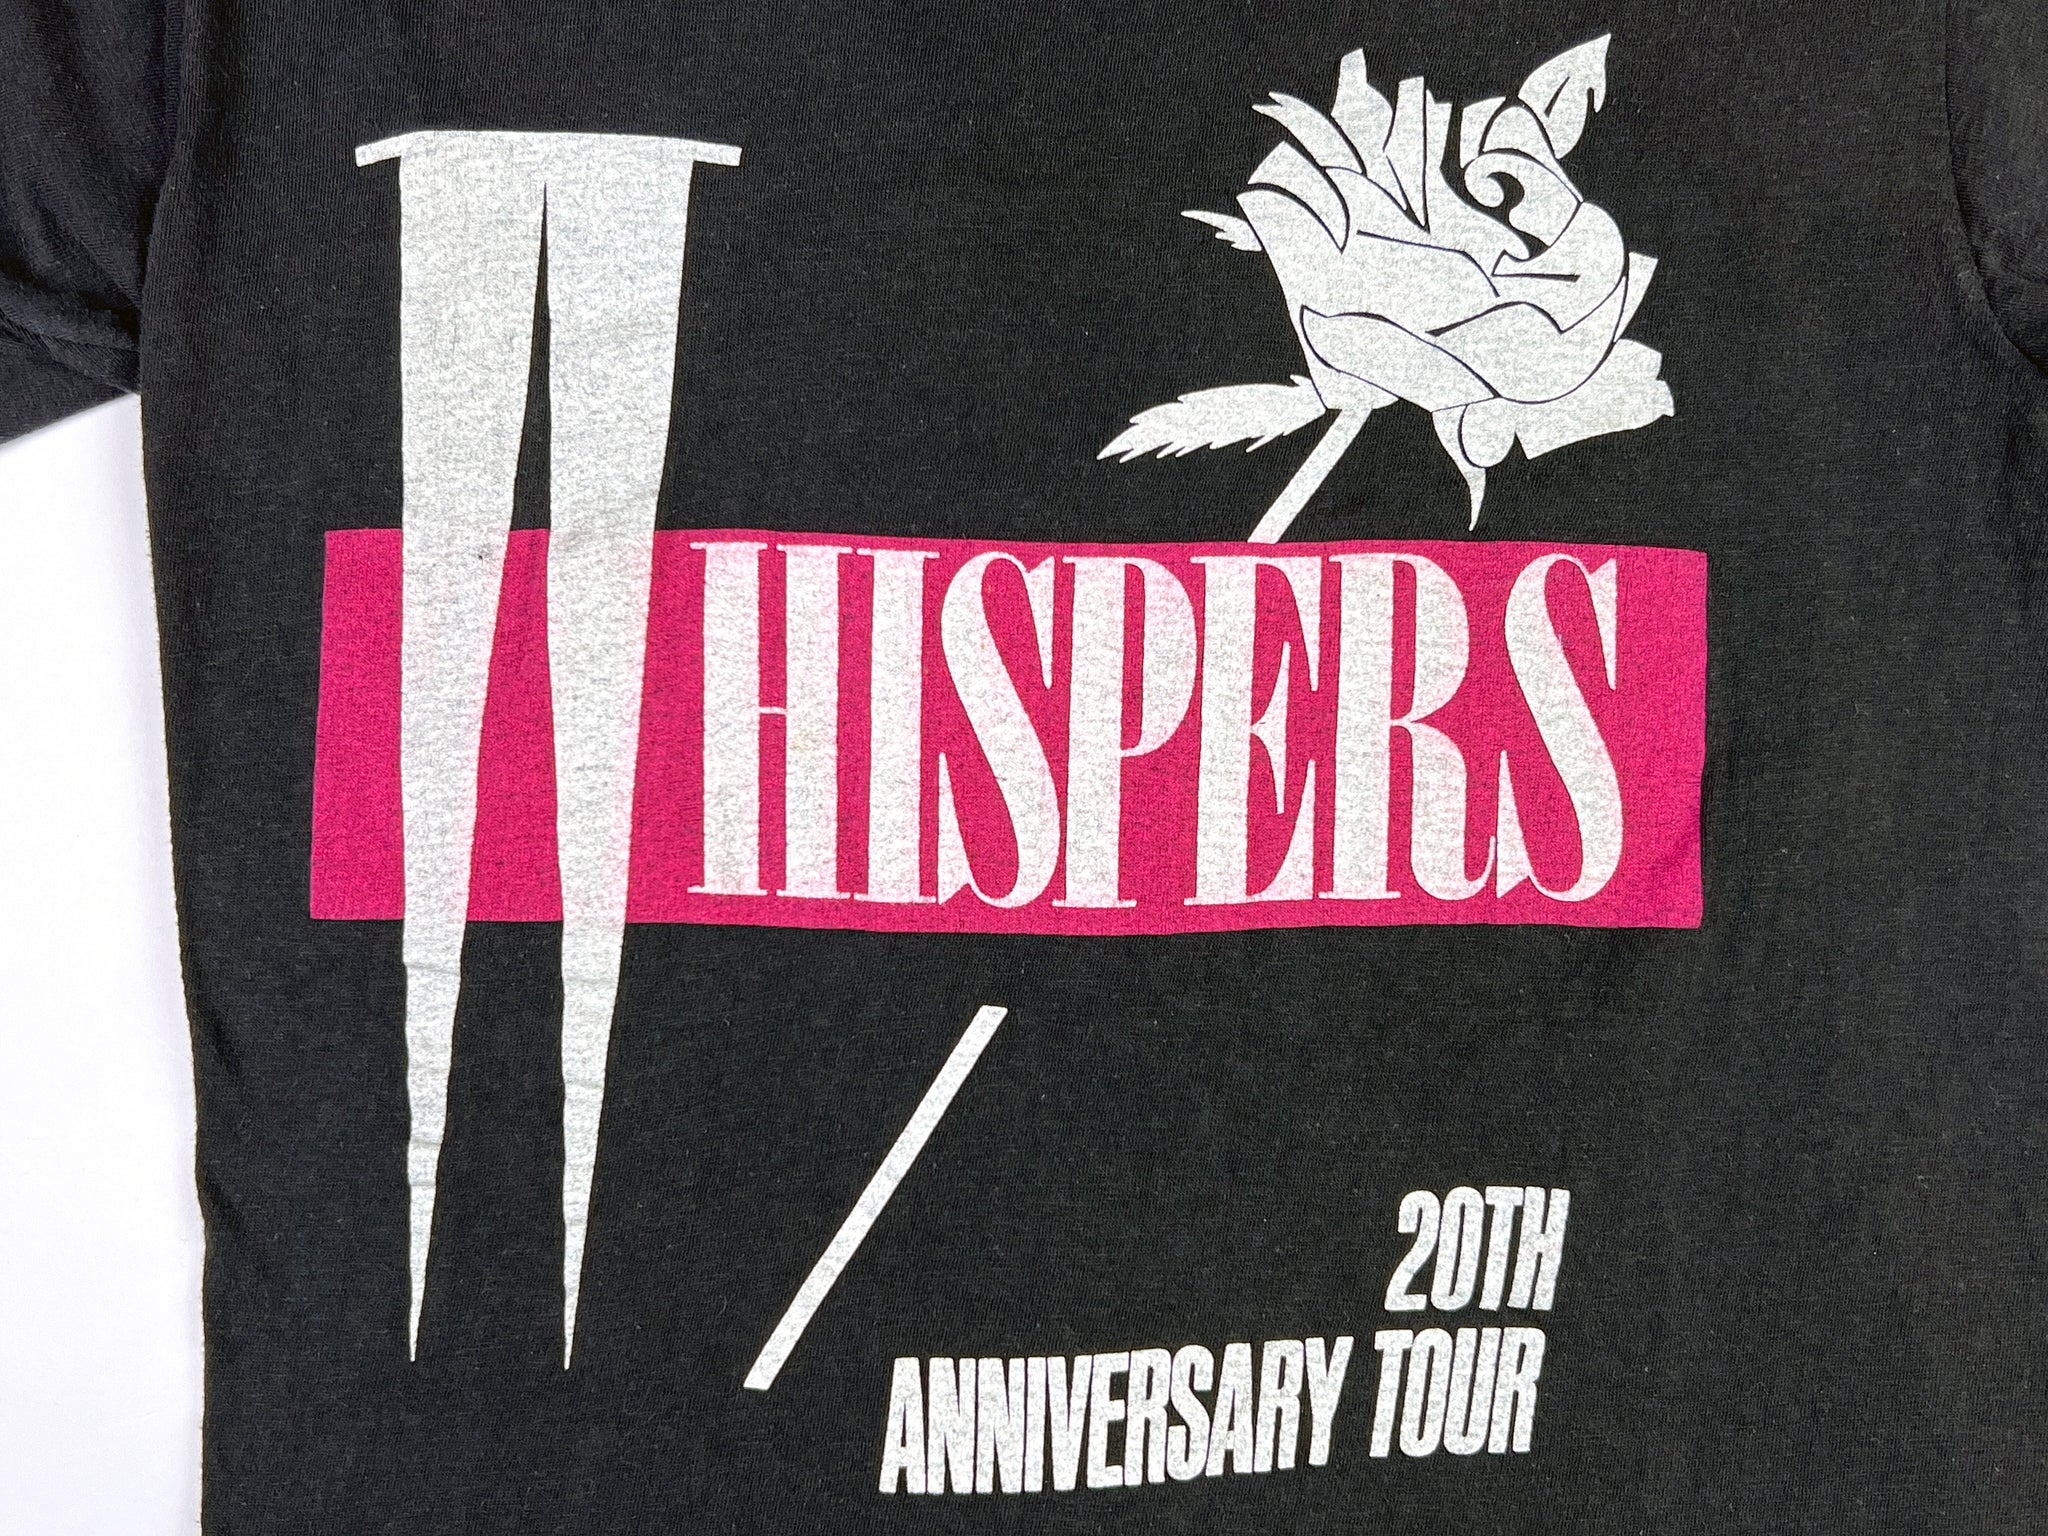 The Whispers 20th Anniversary Tour T-Shirt